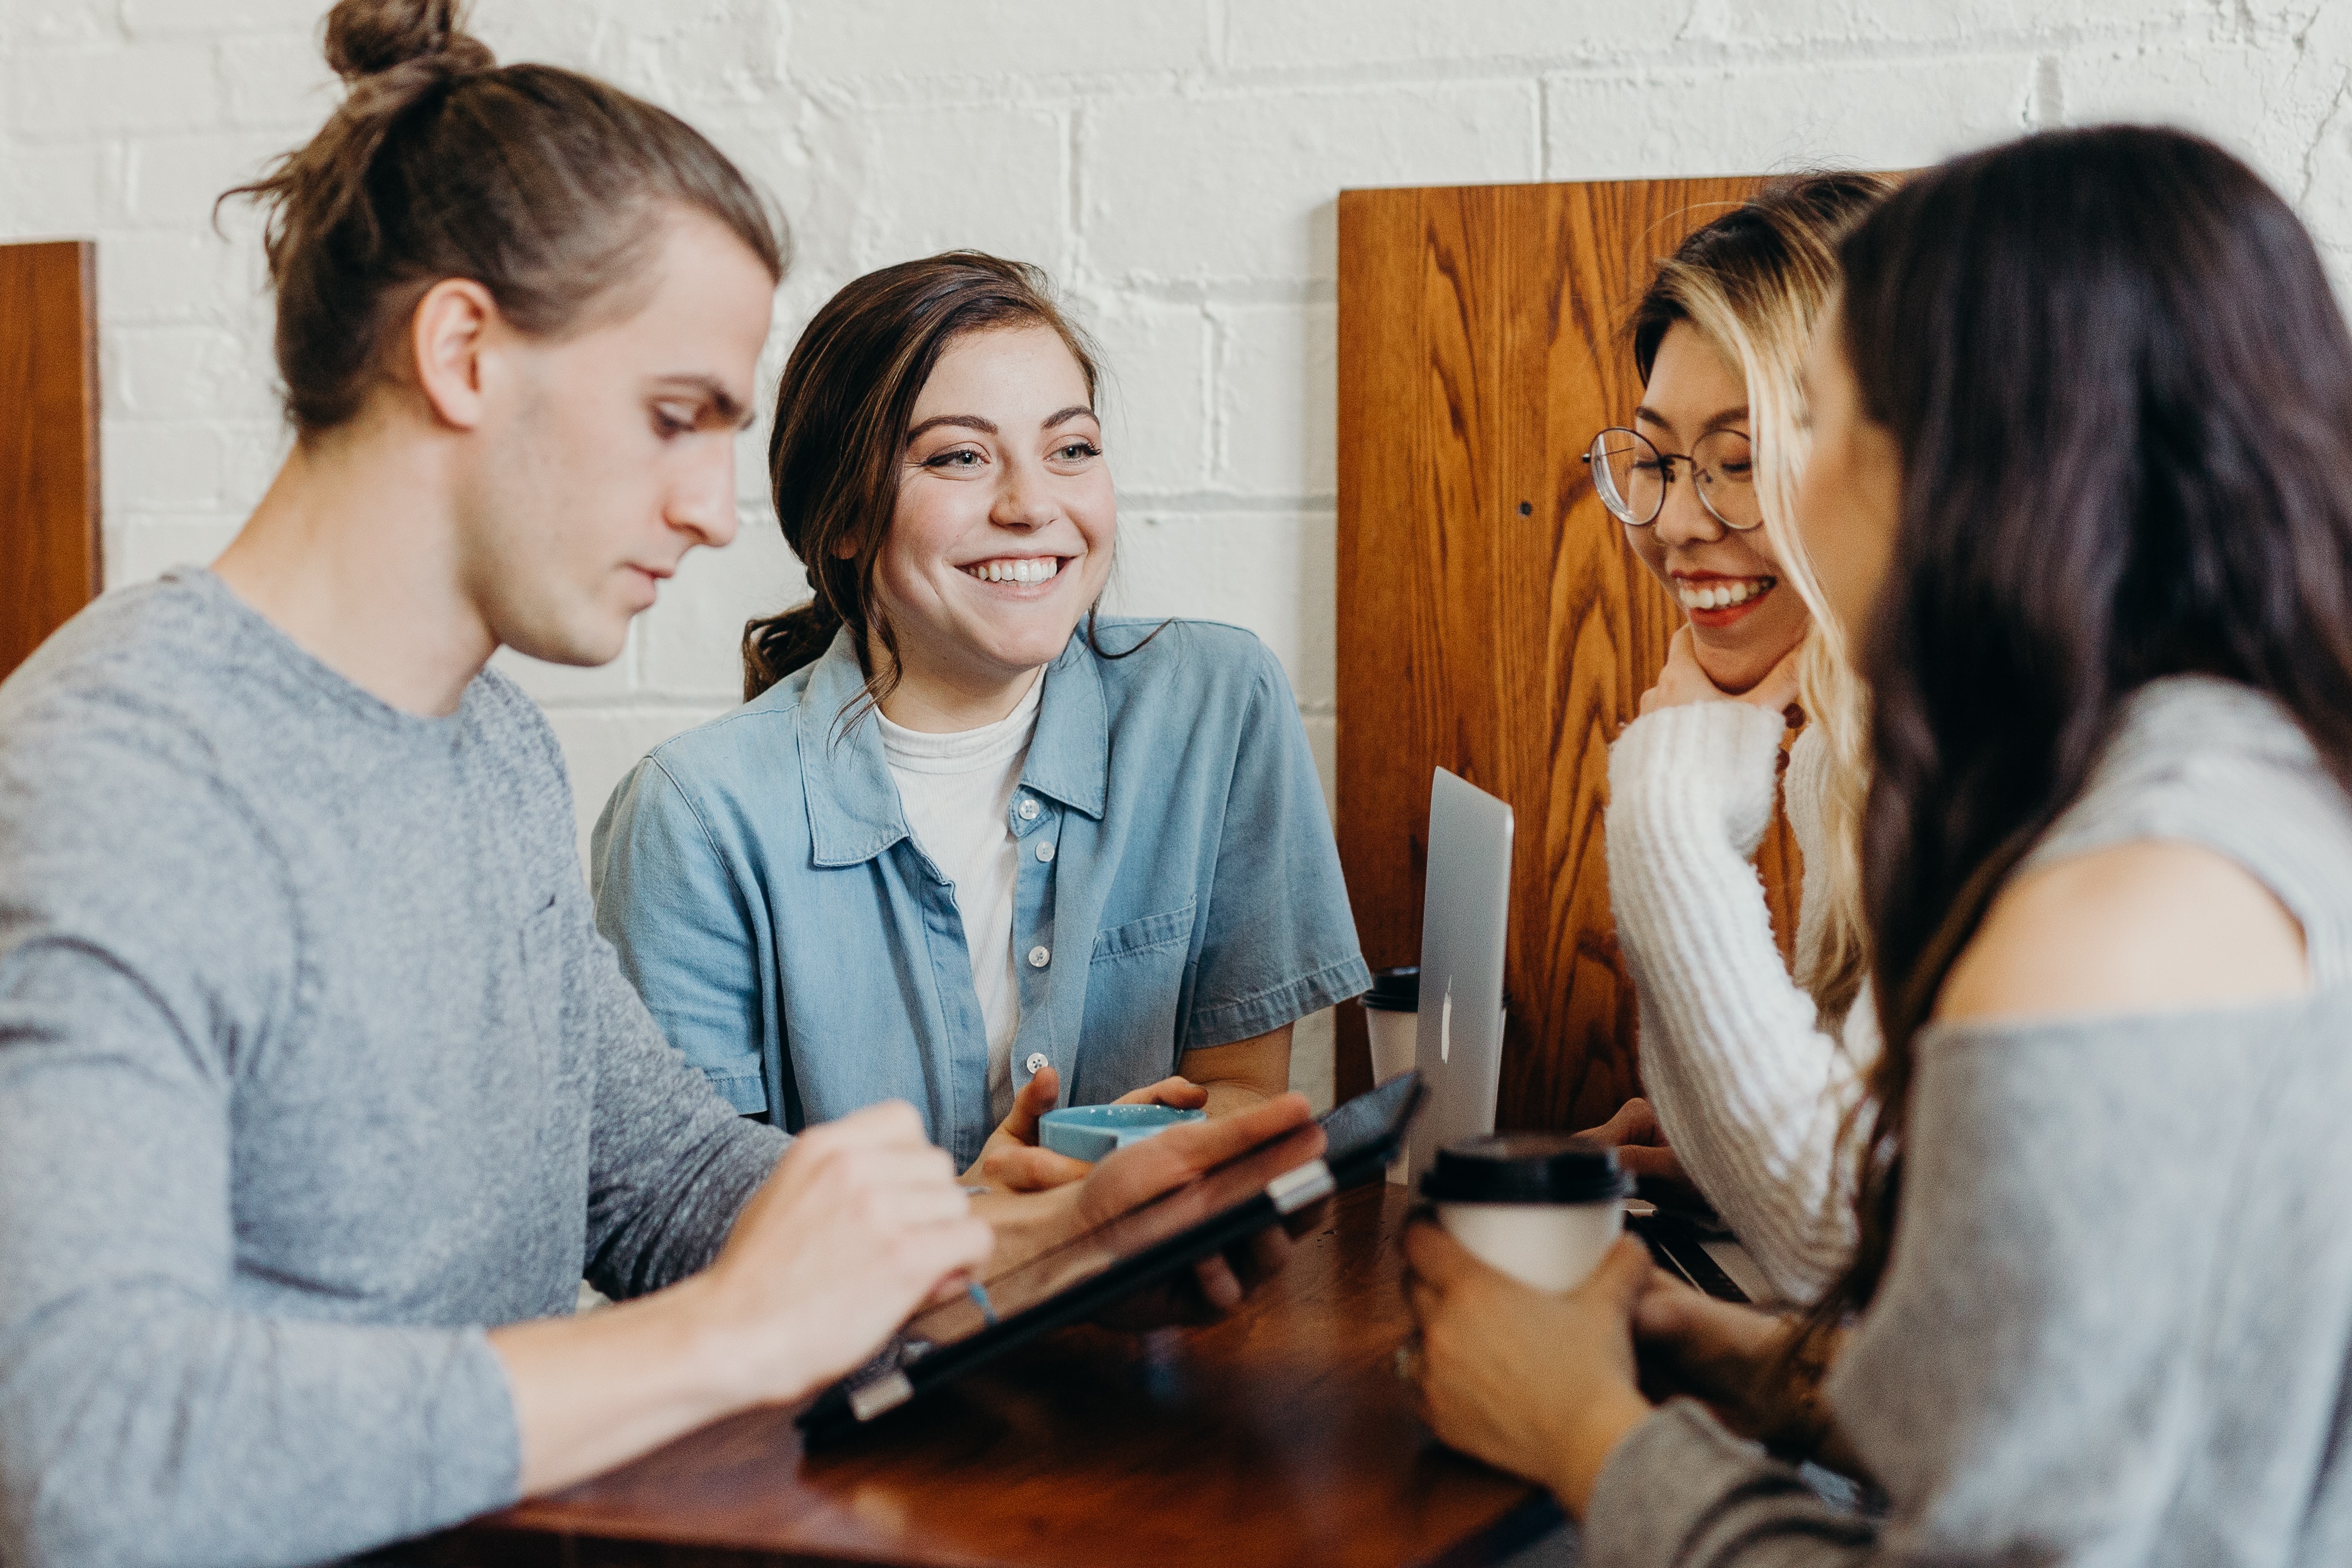 people sitting at a table chatting. Photo by Brooke Cagle on Unsplash